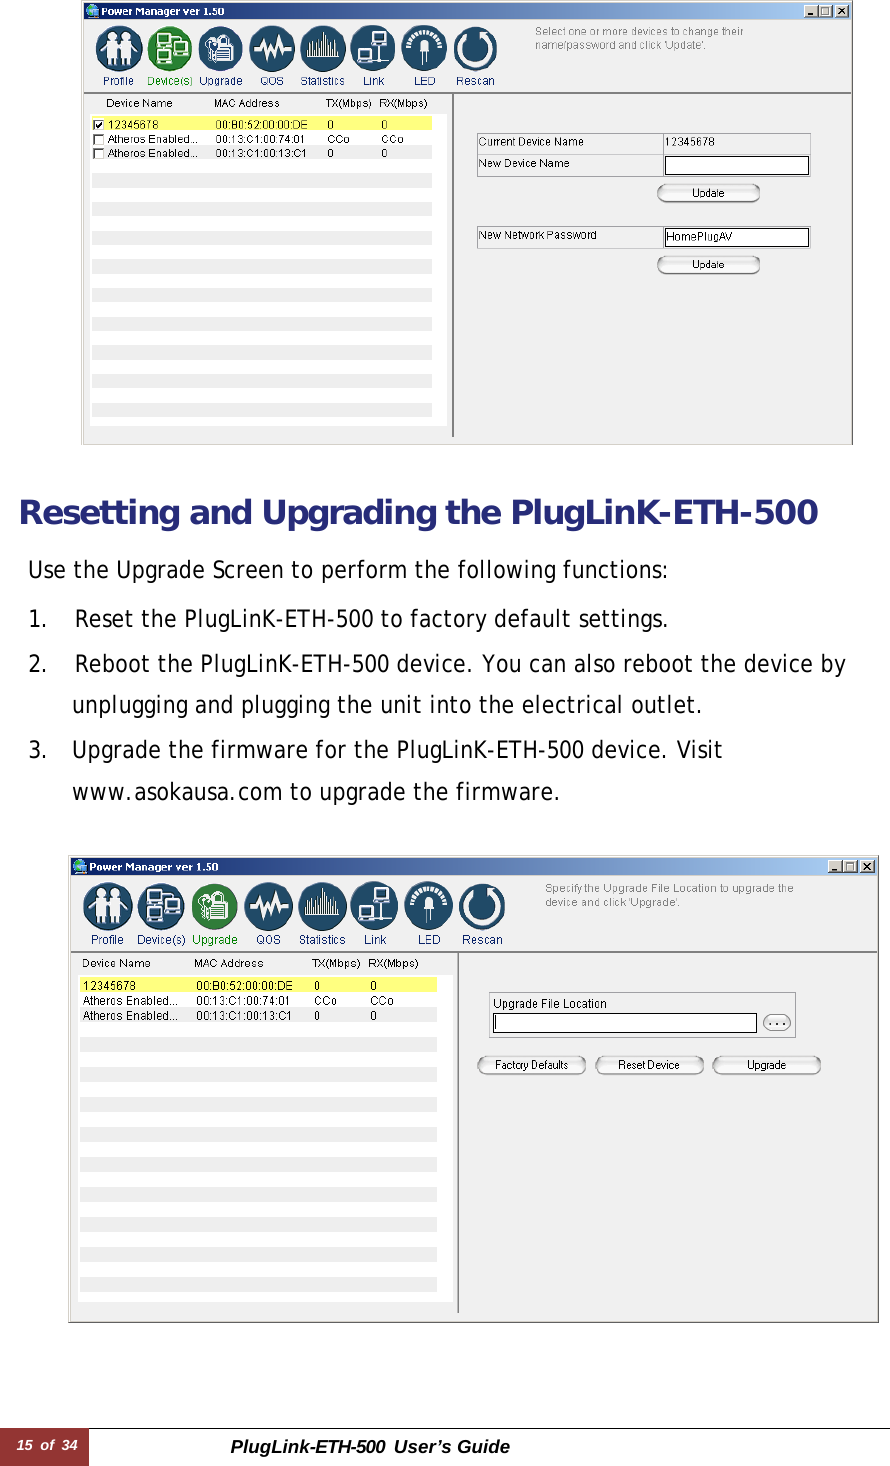 15 of 34 PlugLink-ETH-500  User’s Guide       Resetting and Upgrading the PlugLinK-ETH-500  Use the Upgrade Screen to perform the following functions:  1.    Reset the PlugLinK-ETH-500 to factory default settings. 2.    Reboot the PlugLinK-ETH-500 device. You can also reboot the device by unplugging and plugging the unit into the electrical outlet. 3.  Upgrade the firmware for the PlugLinK-ETH-500 device. Visit www.asokausa.com to upgrade the firmware.     